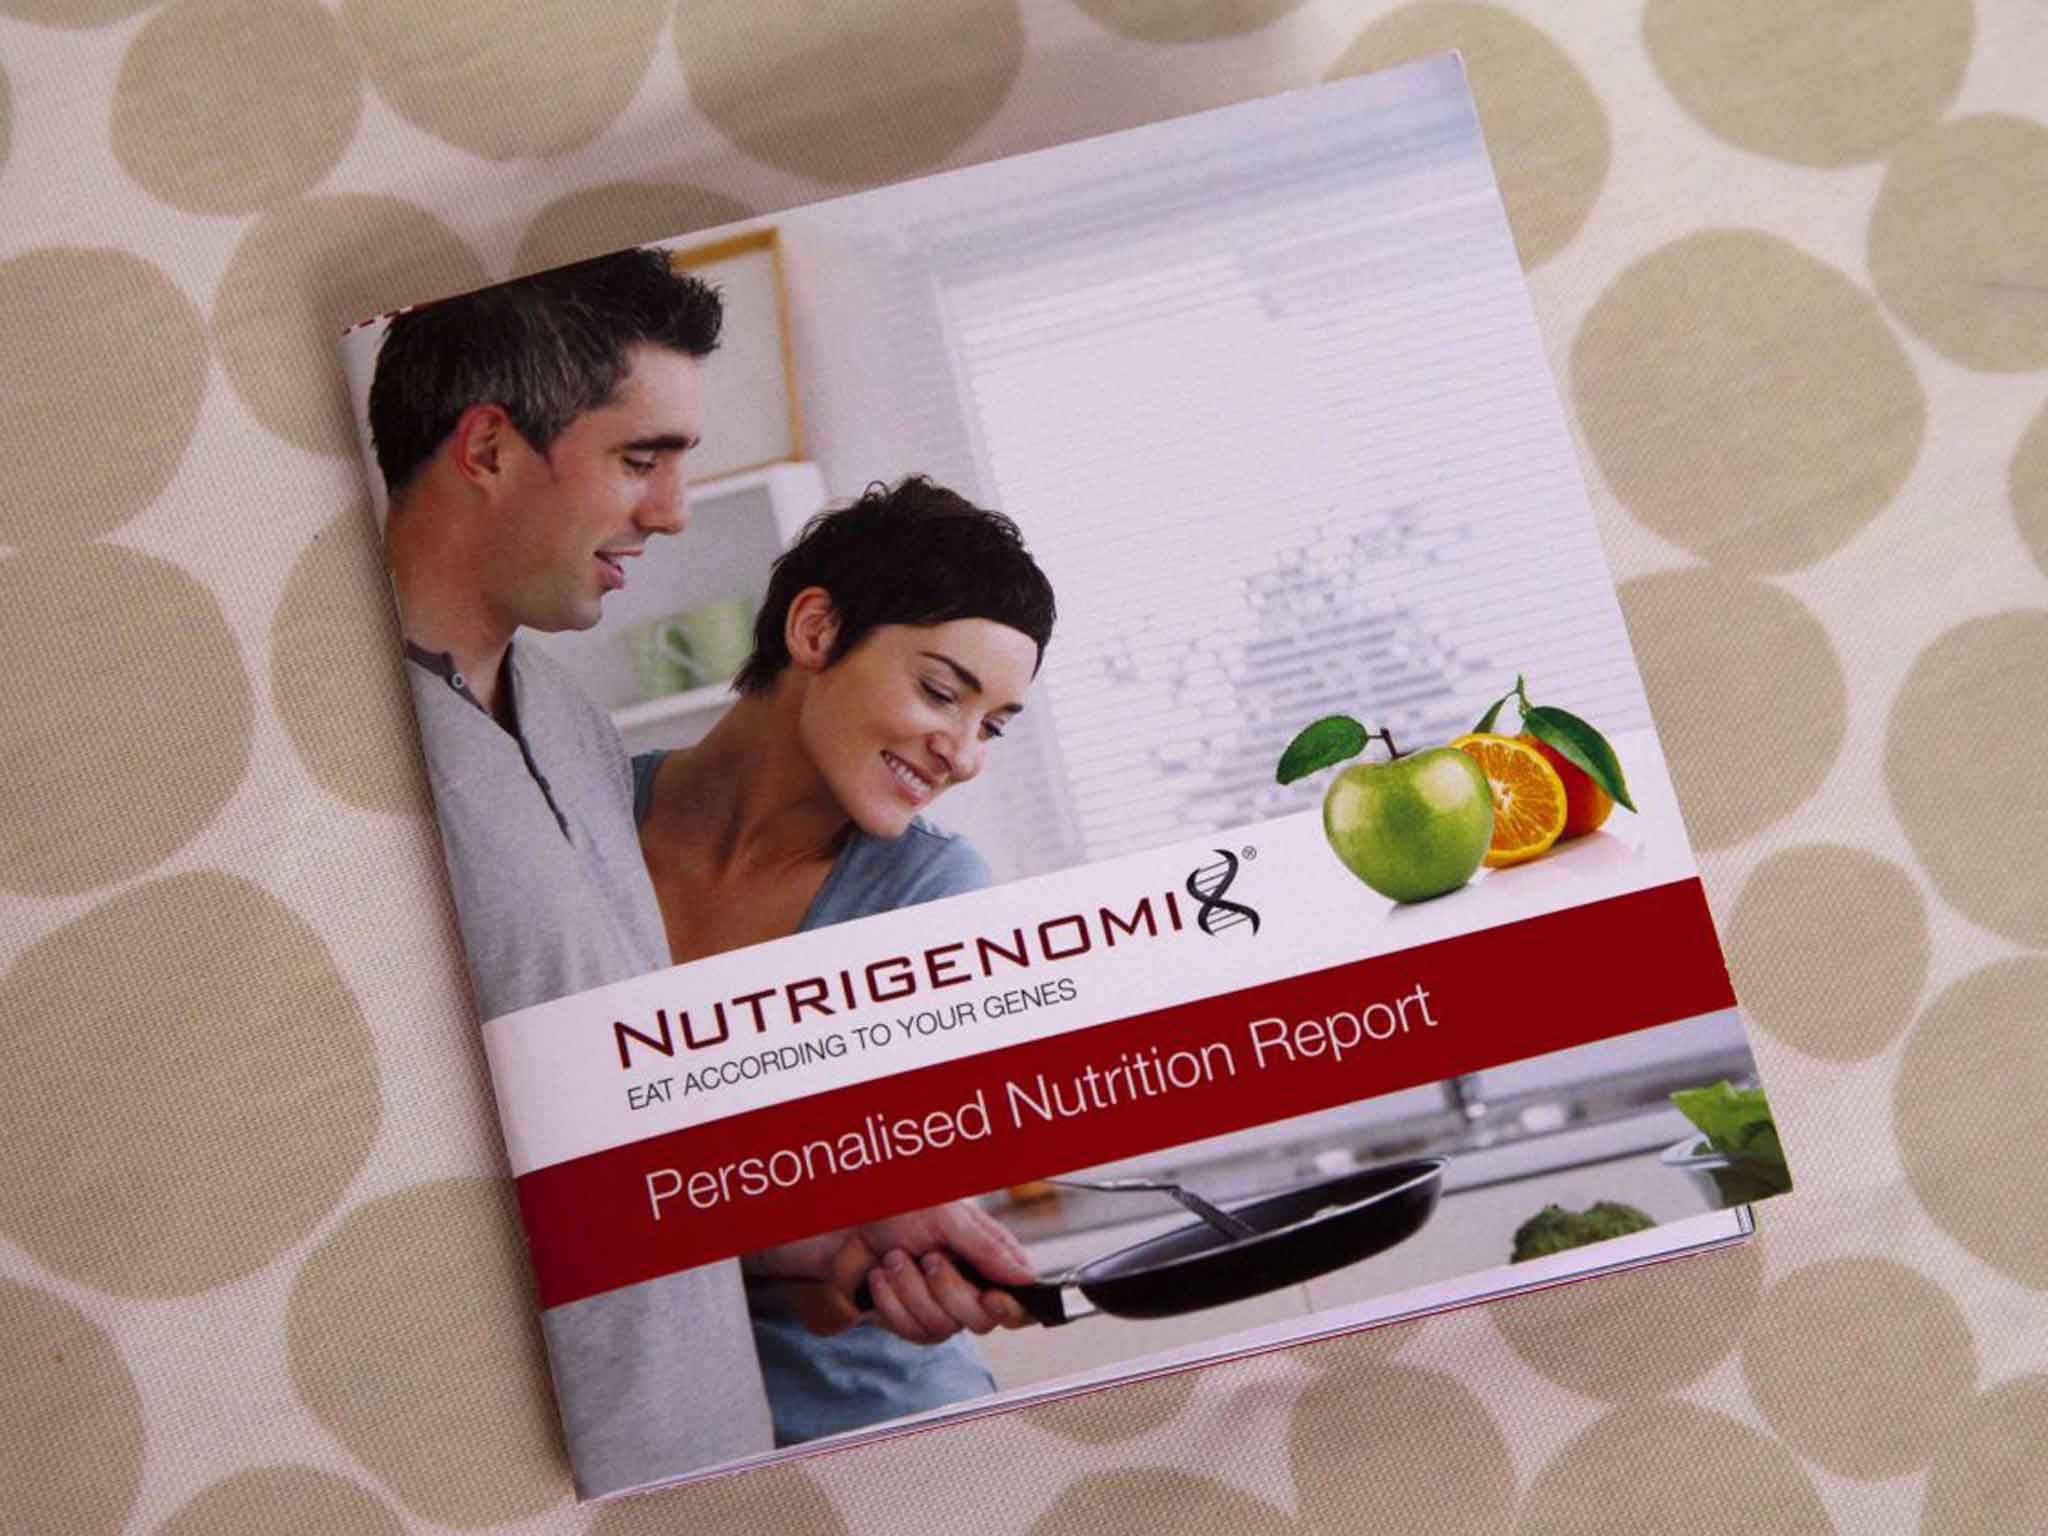 The Nutrigenomix report only looks at vitamin C, folate, glycaemic index, omega-3 fat, saturated fat, sodium and caffeine